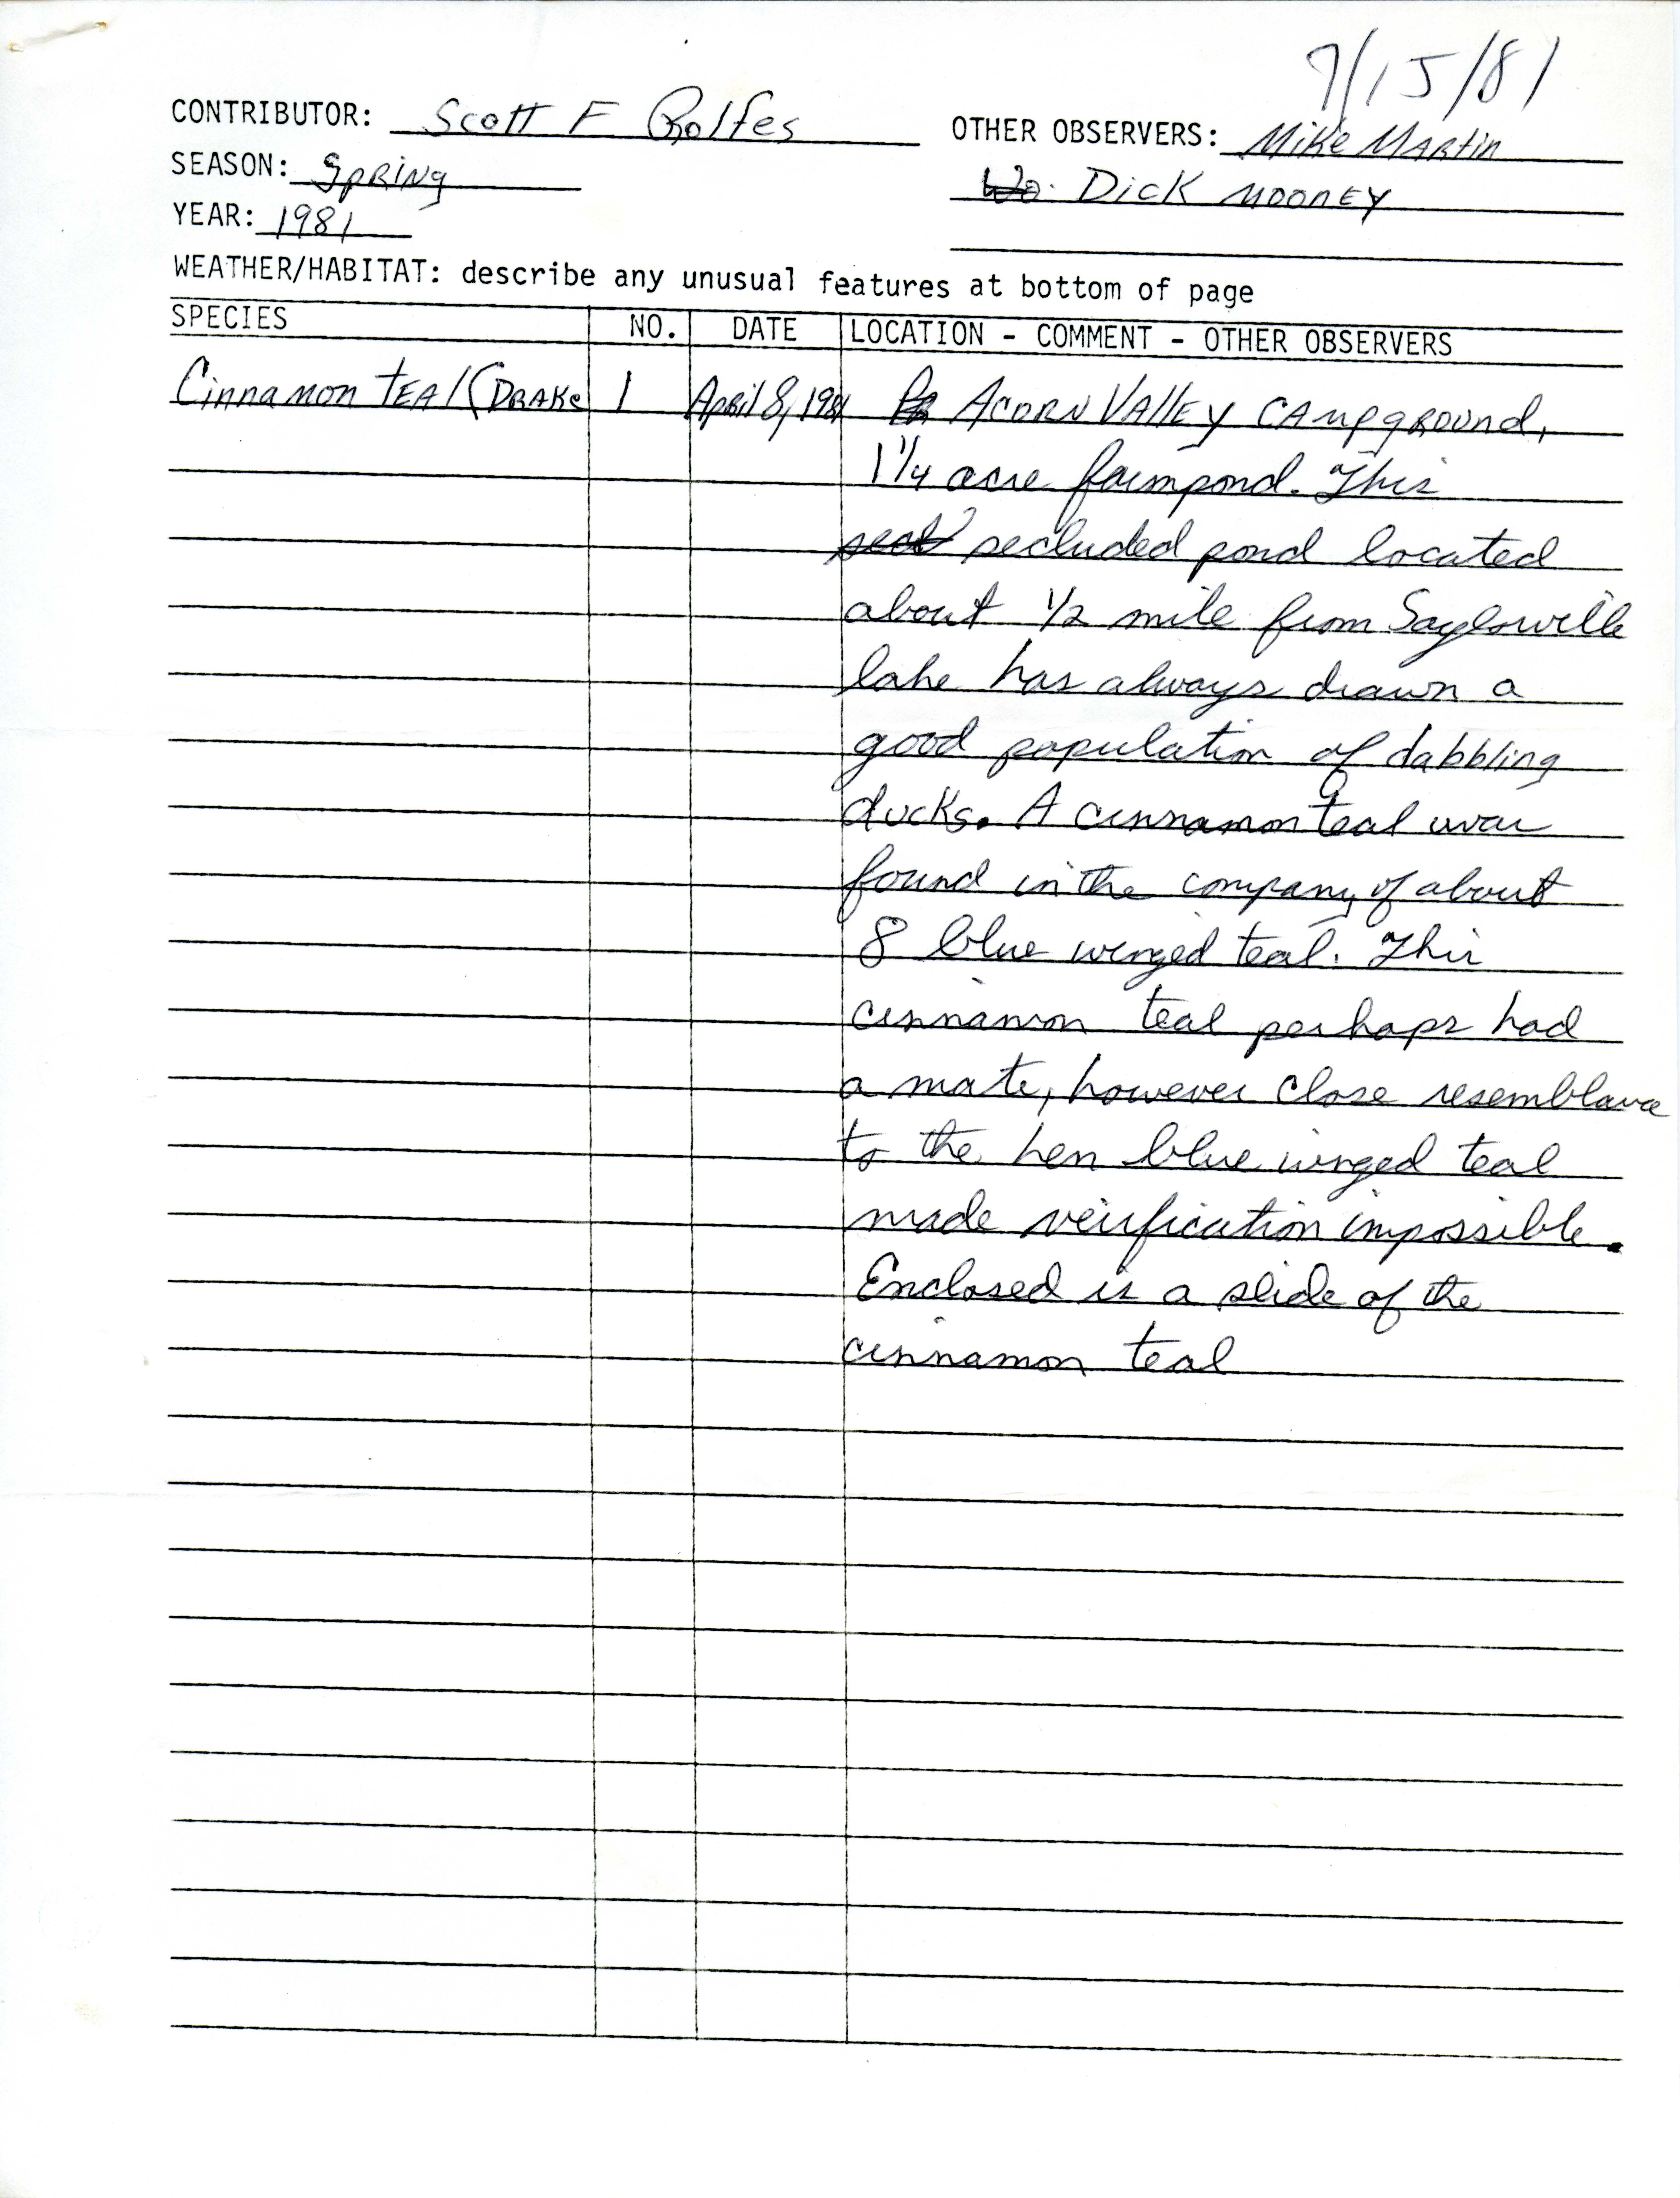 Scott Rolfes letter to Thomas H. Kent regarding the sighting of a Cinnamon Teal, July 15, 1981